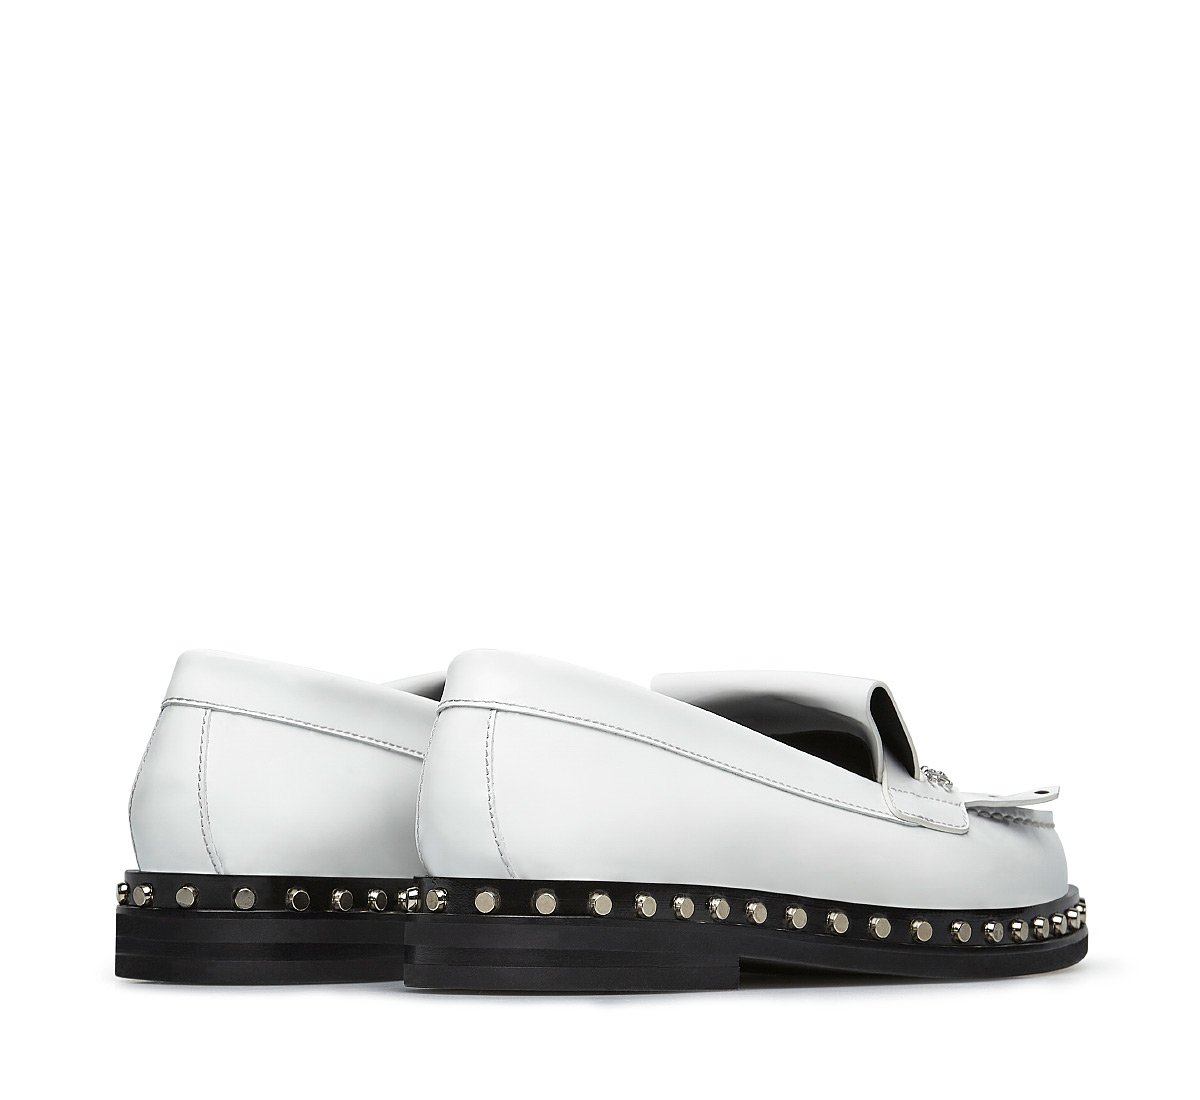 Fabi patent leather loafer